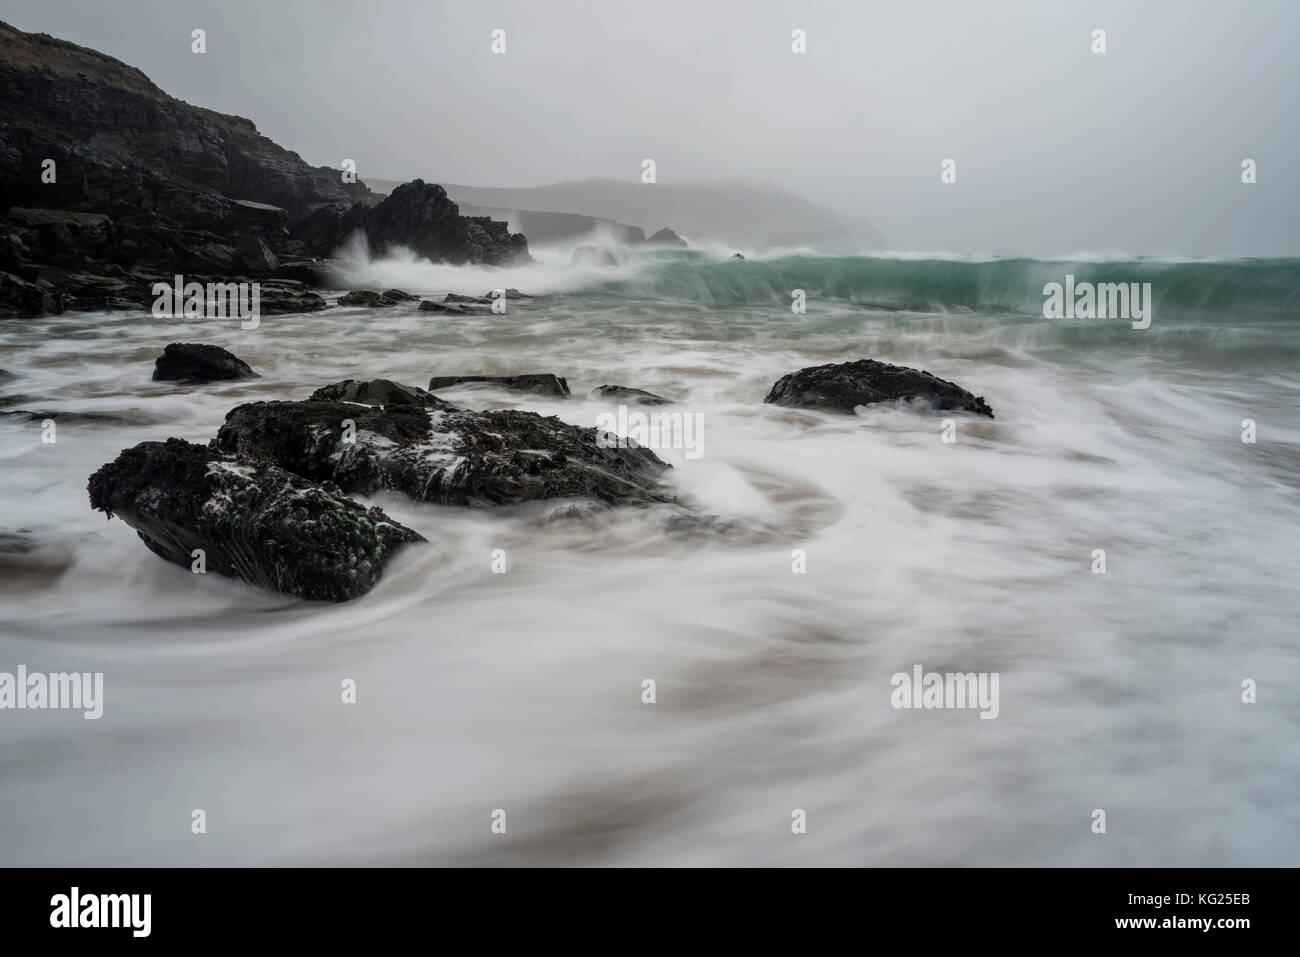 Incoming tide, Clogher Bay, Clogher, Dingle Peninsula, County Kerry, Munster, Republic of Ireland, Europe Stock Photo